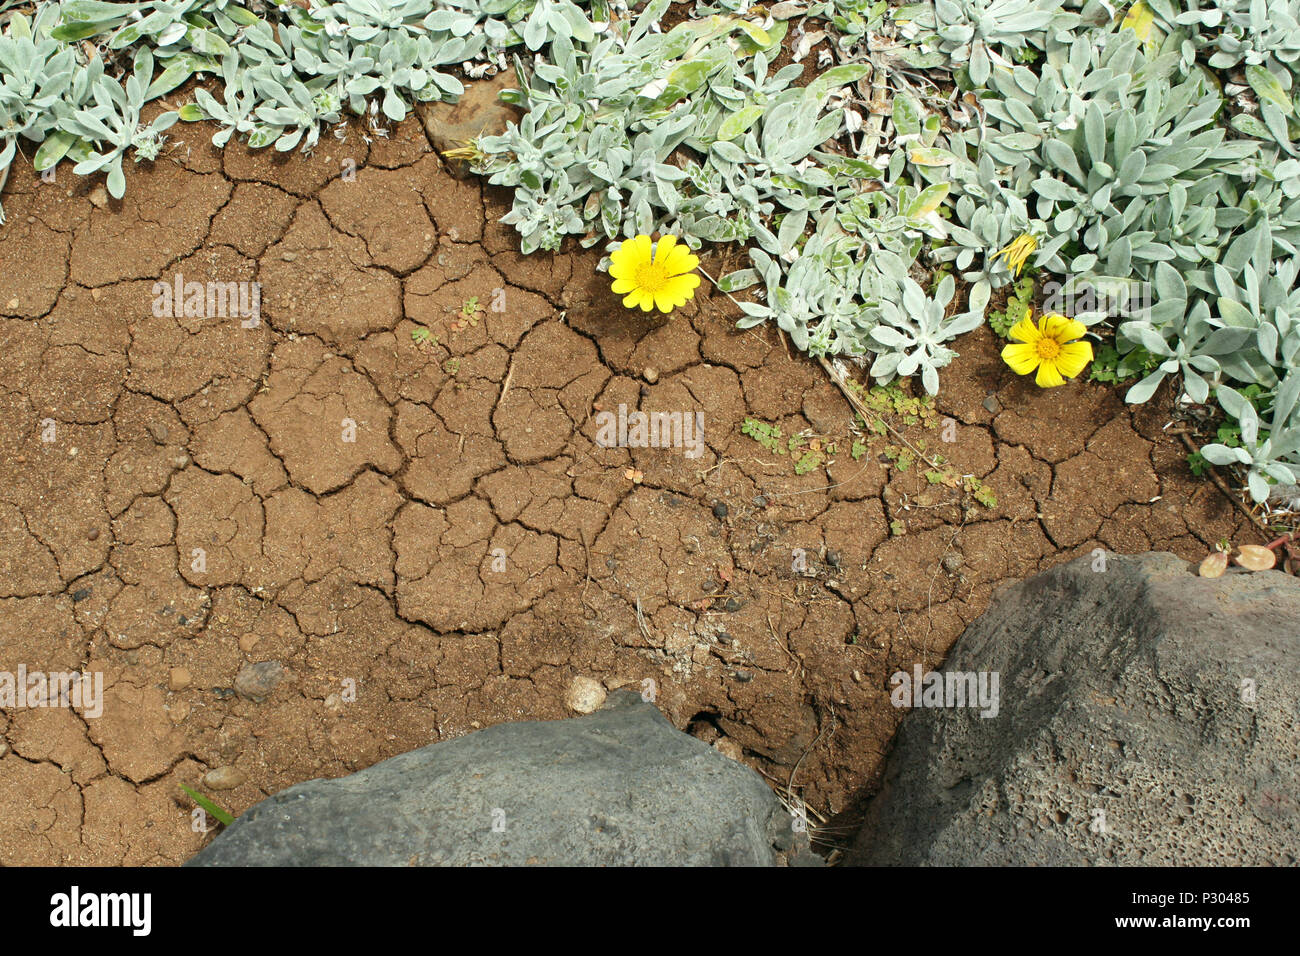 Close up of volcanic ground with creeps with spontaneous branching of succulent plant with yellow flowers Stock Photo